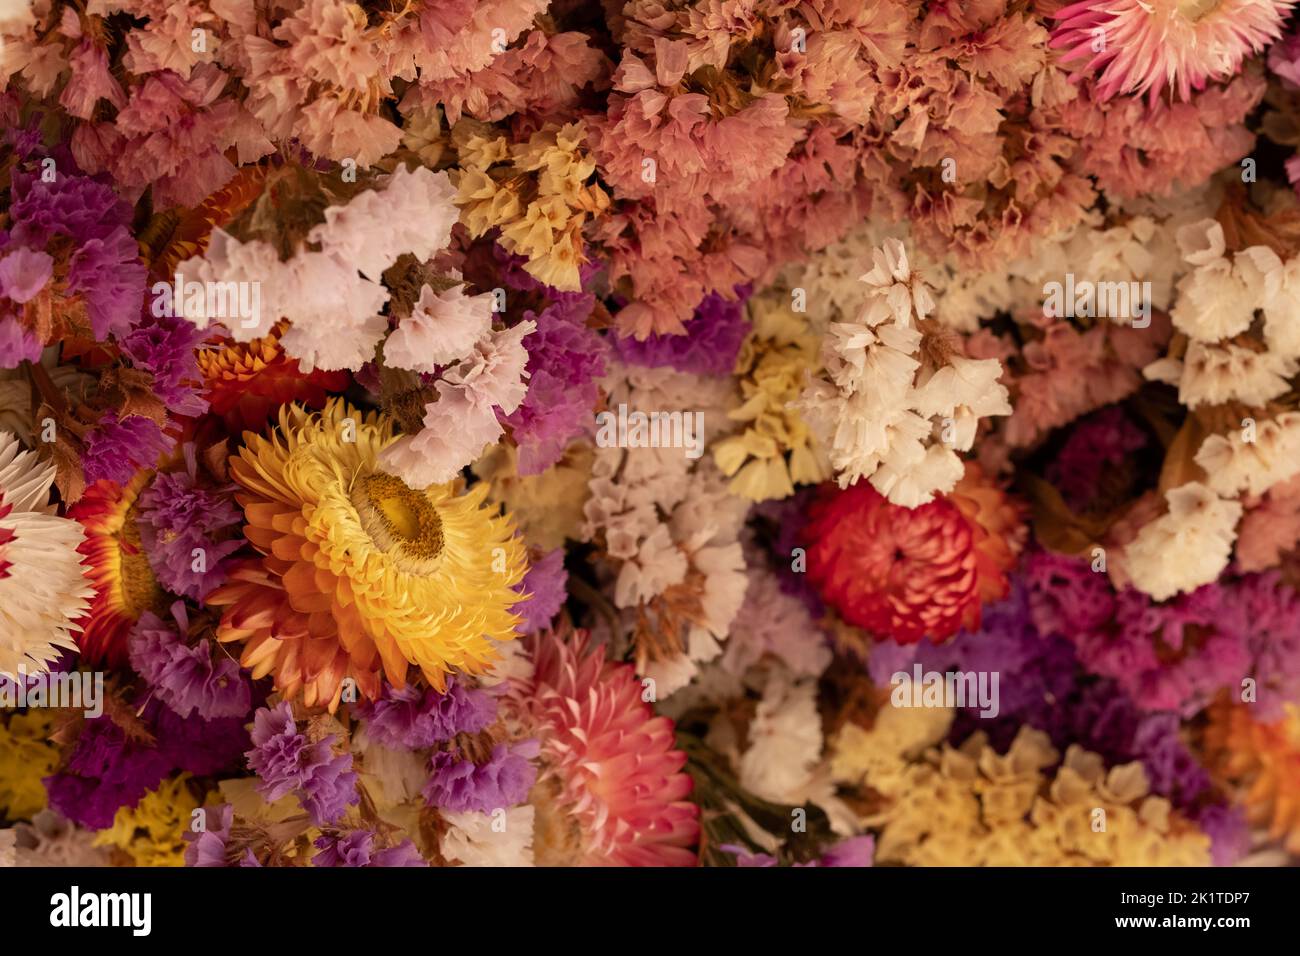 Mass of colourful dried flowers, photographed with a macro lens at RHS Wisley garden, Surrey UK. Stock Photo